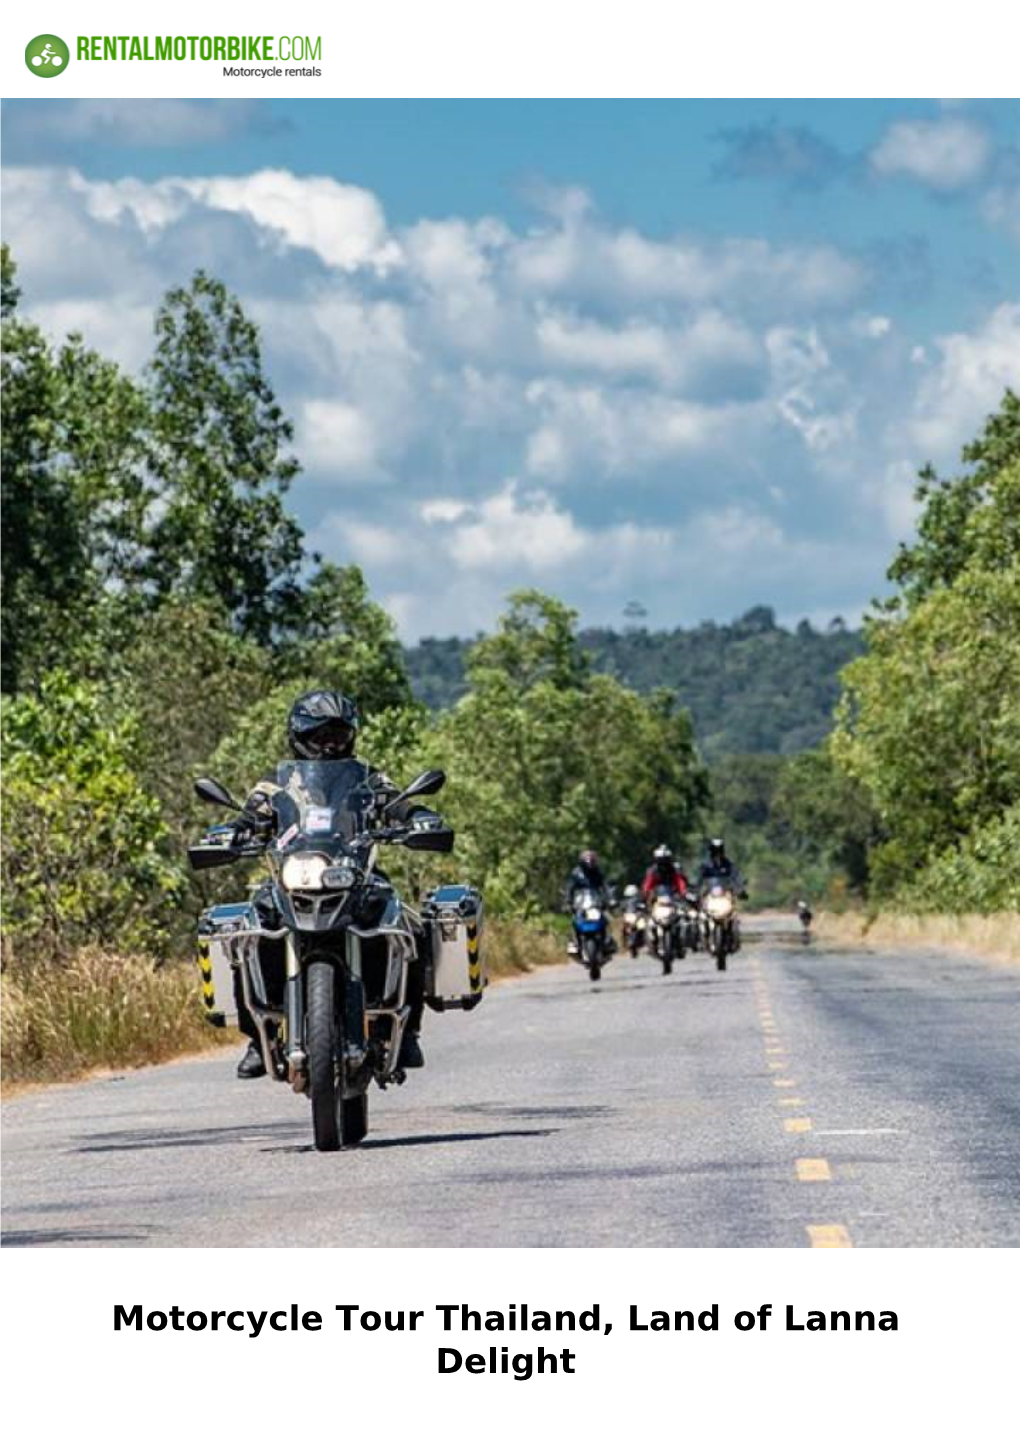 Motorcycle Tour Thailand, Land of Lanna Delight Motorcycle Tour Thailand, Land of Lanna Delight